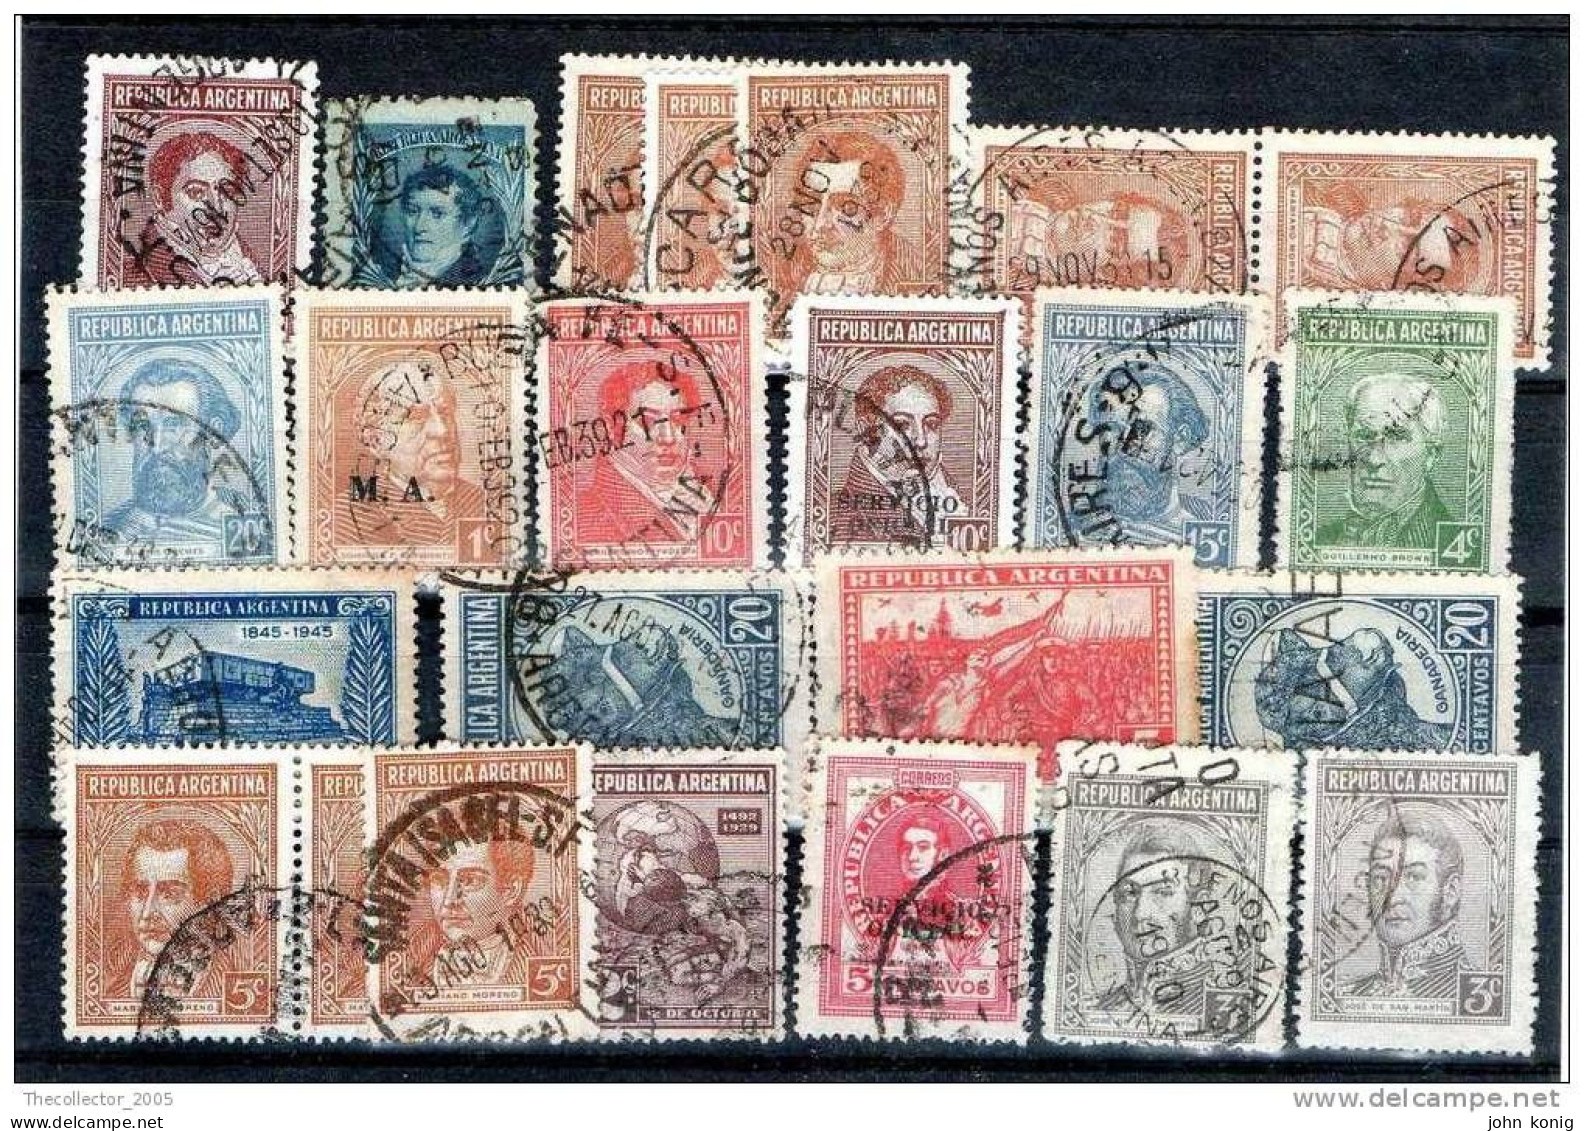 ARGENTINA - ARGENTINE - ARGENTINIEN - Stamps Lot - Lotto Usati - Used - Gestempeld - Collections, Lots & Séries